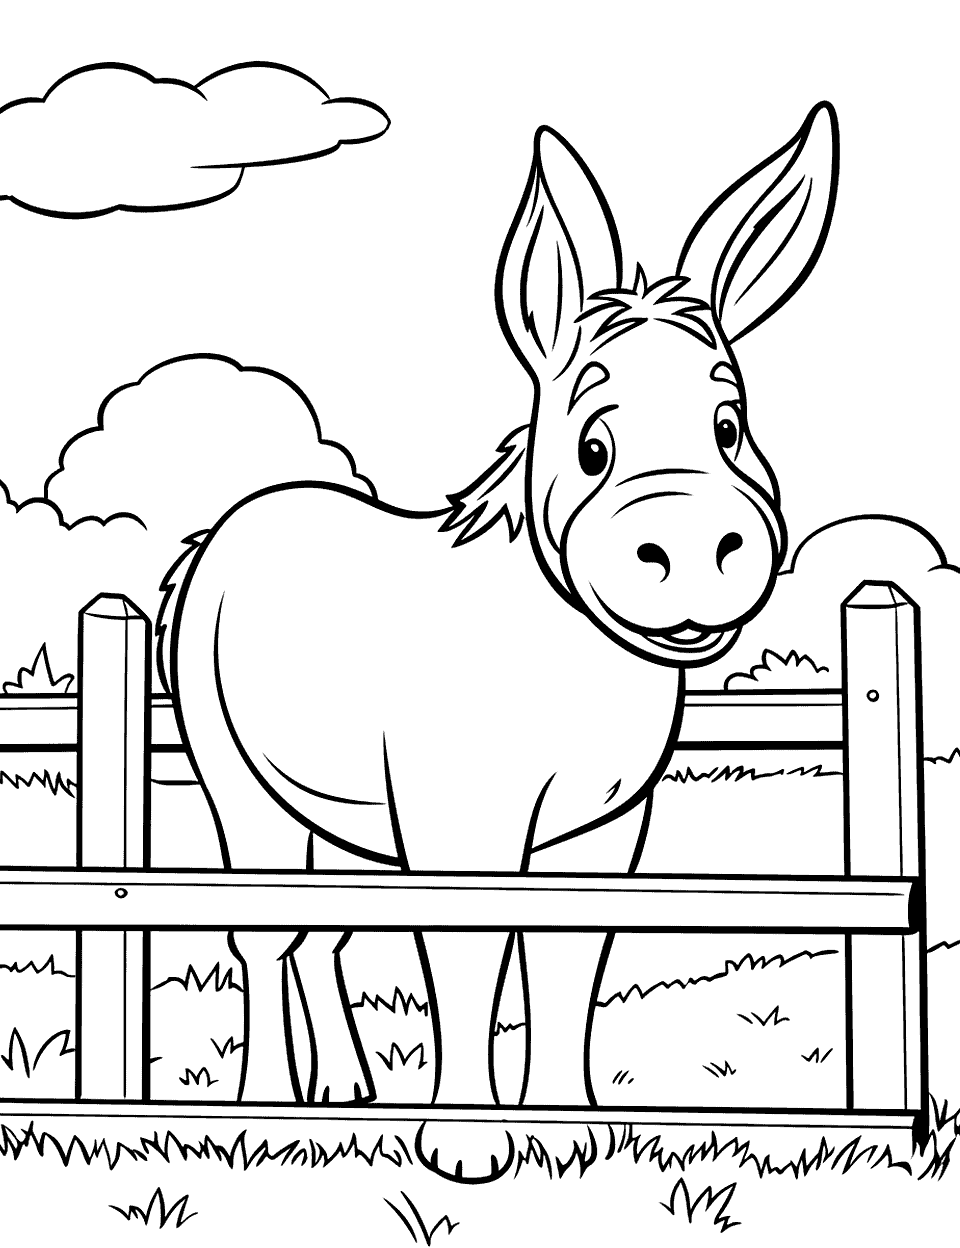 Donkey by the Fence Farm Coloring Page - A donkey standing next to a wooden fence.